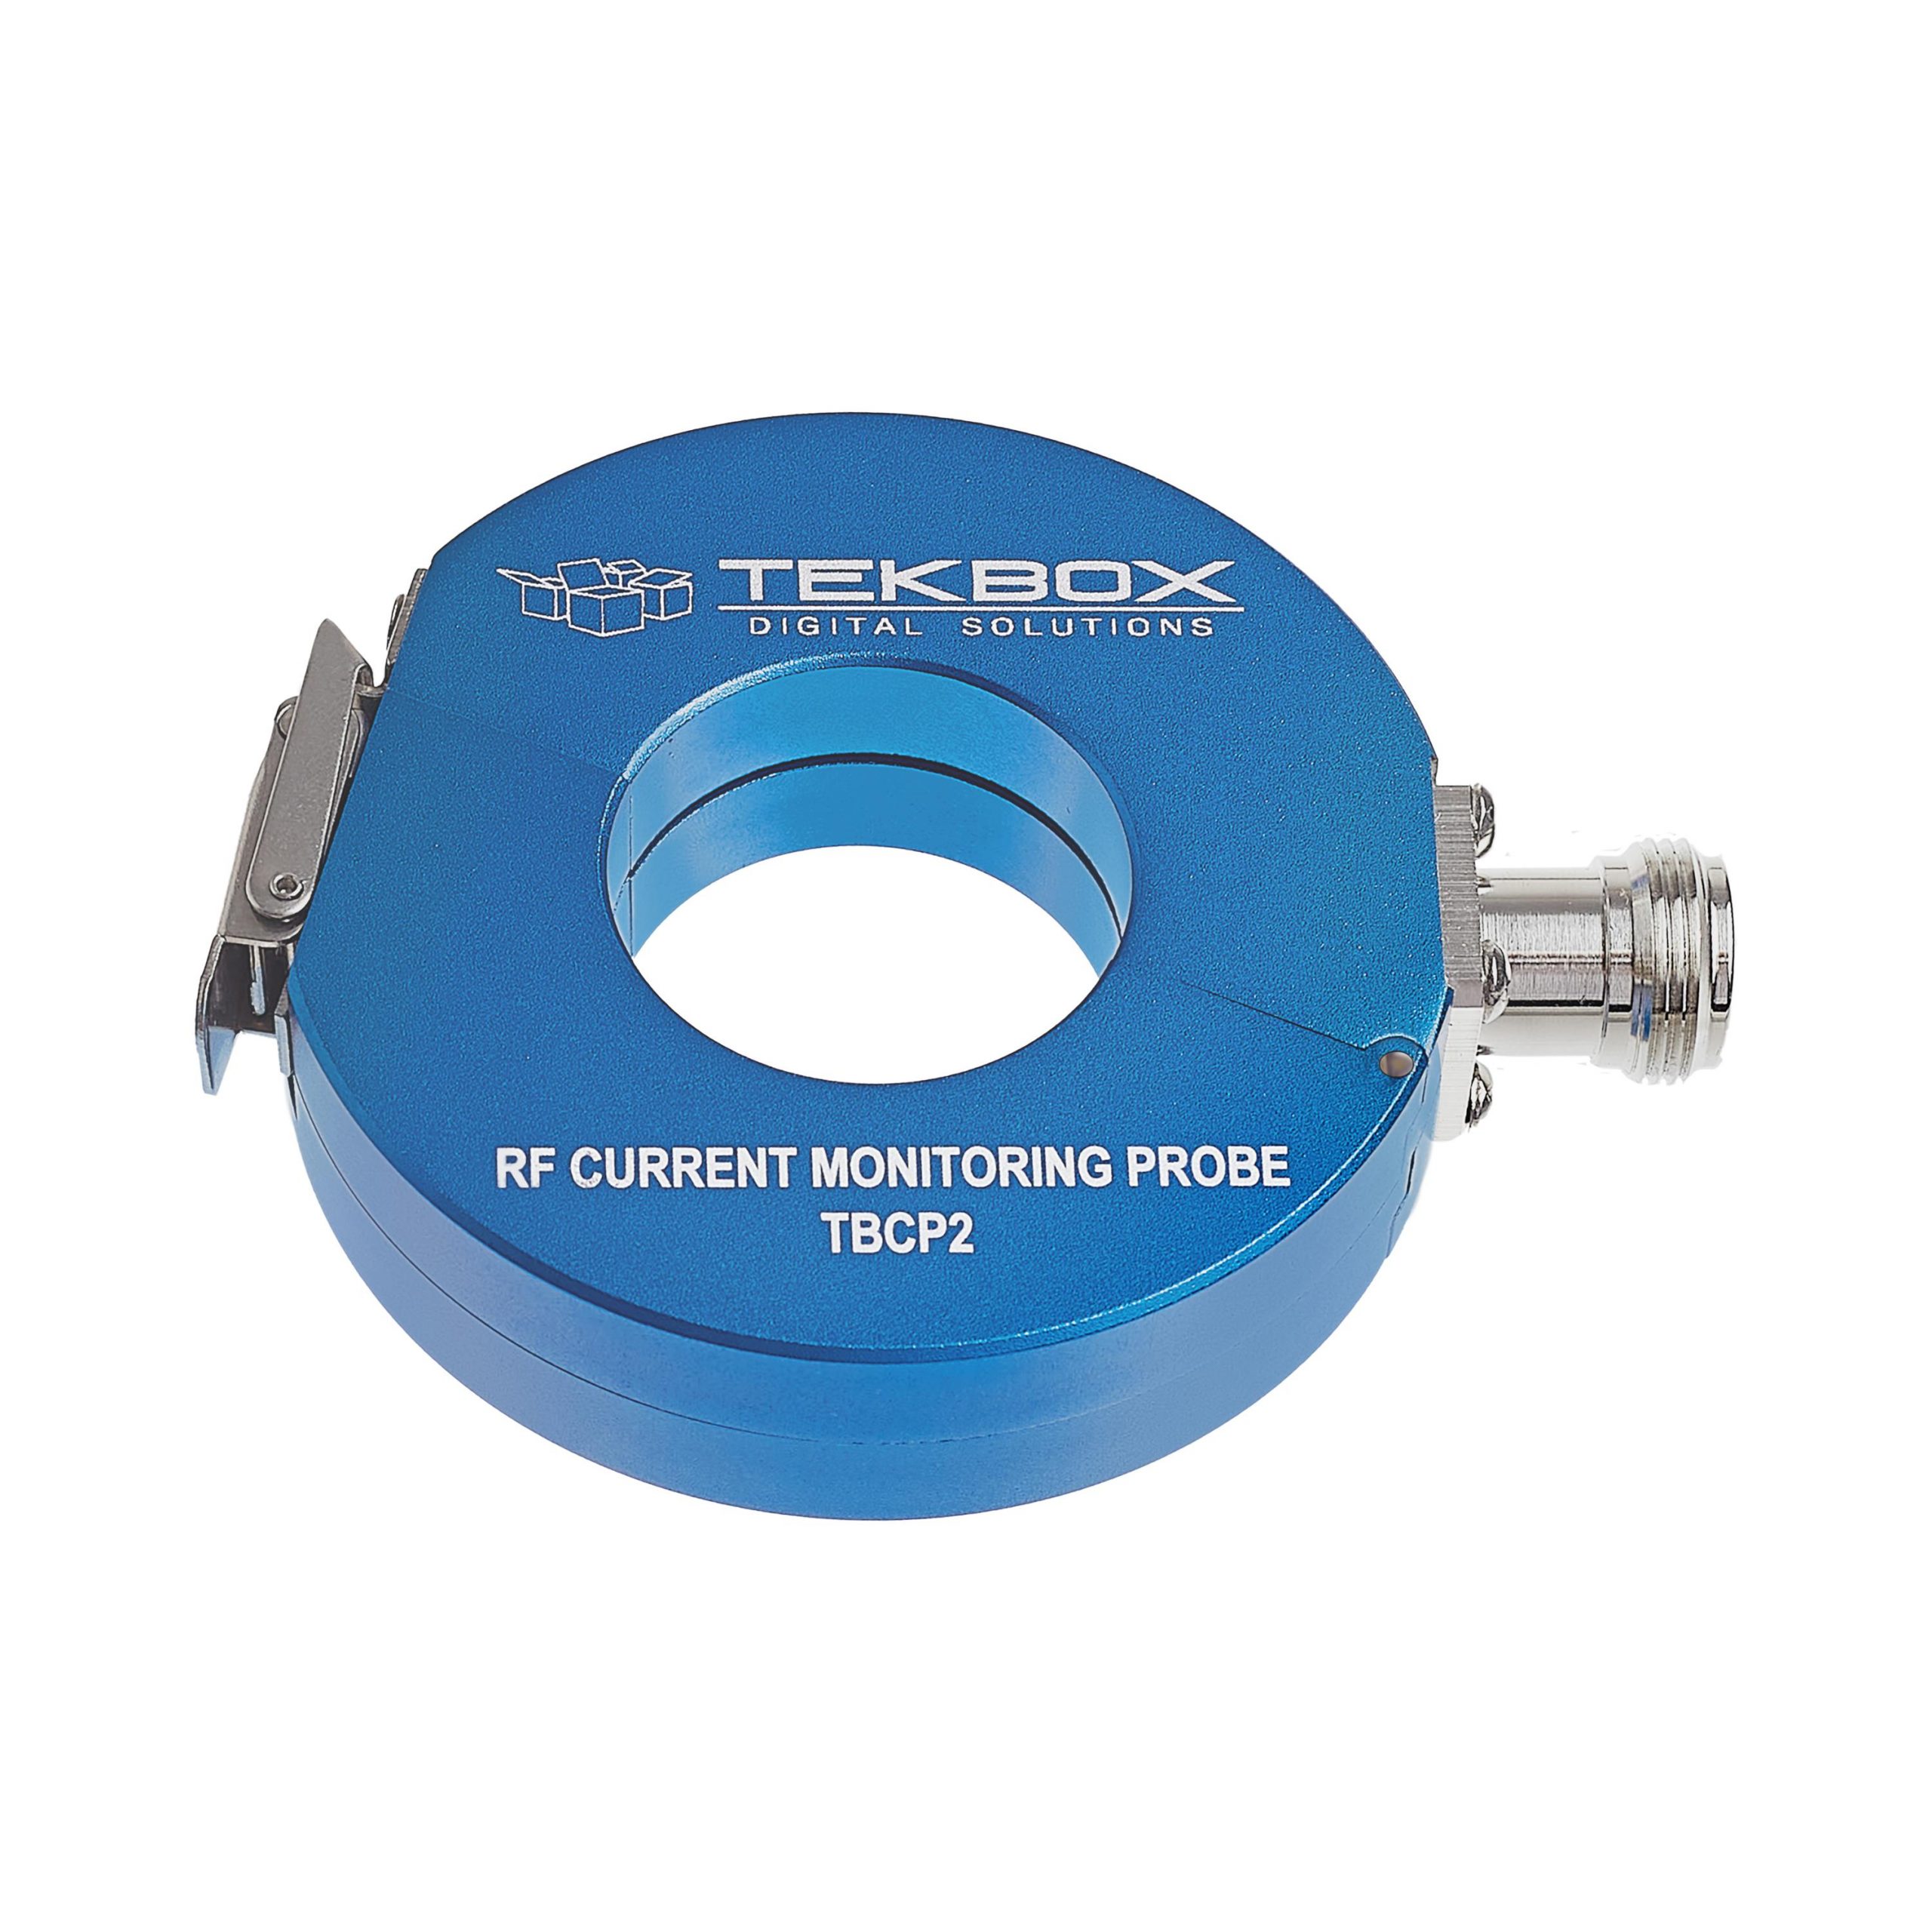 Tekbox introduced new affordable EMC current monitor probes